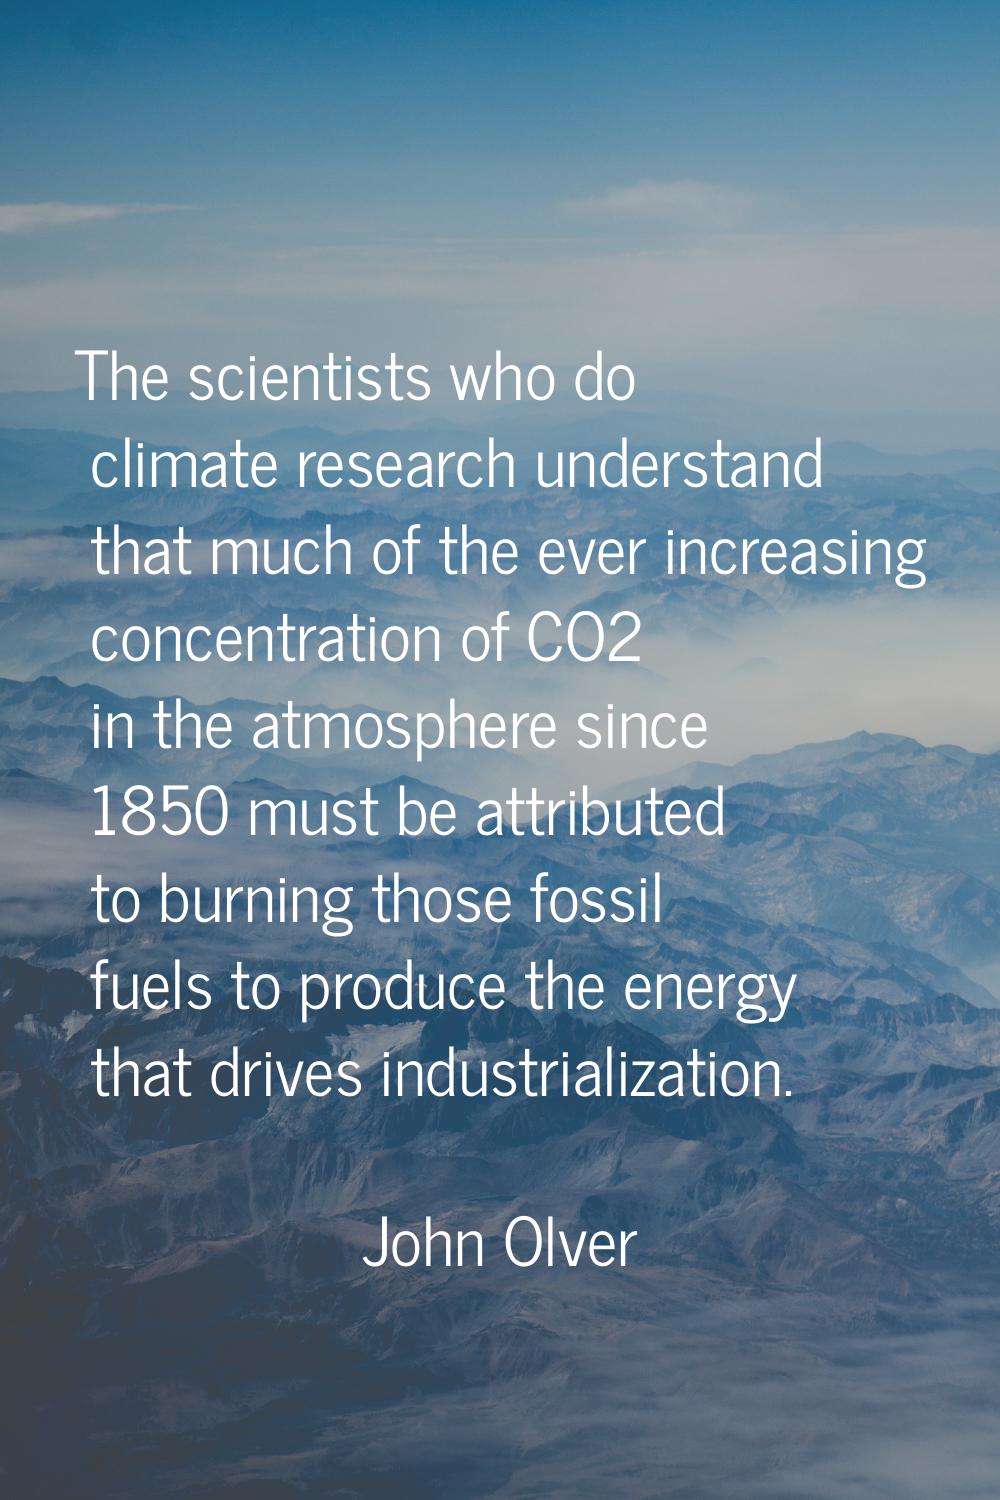 The scientists who do climate research understand that much of the ever increasing concentration of